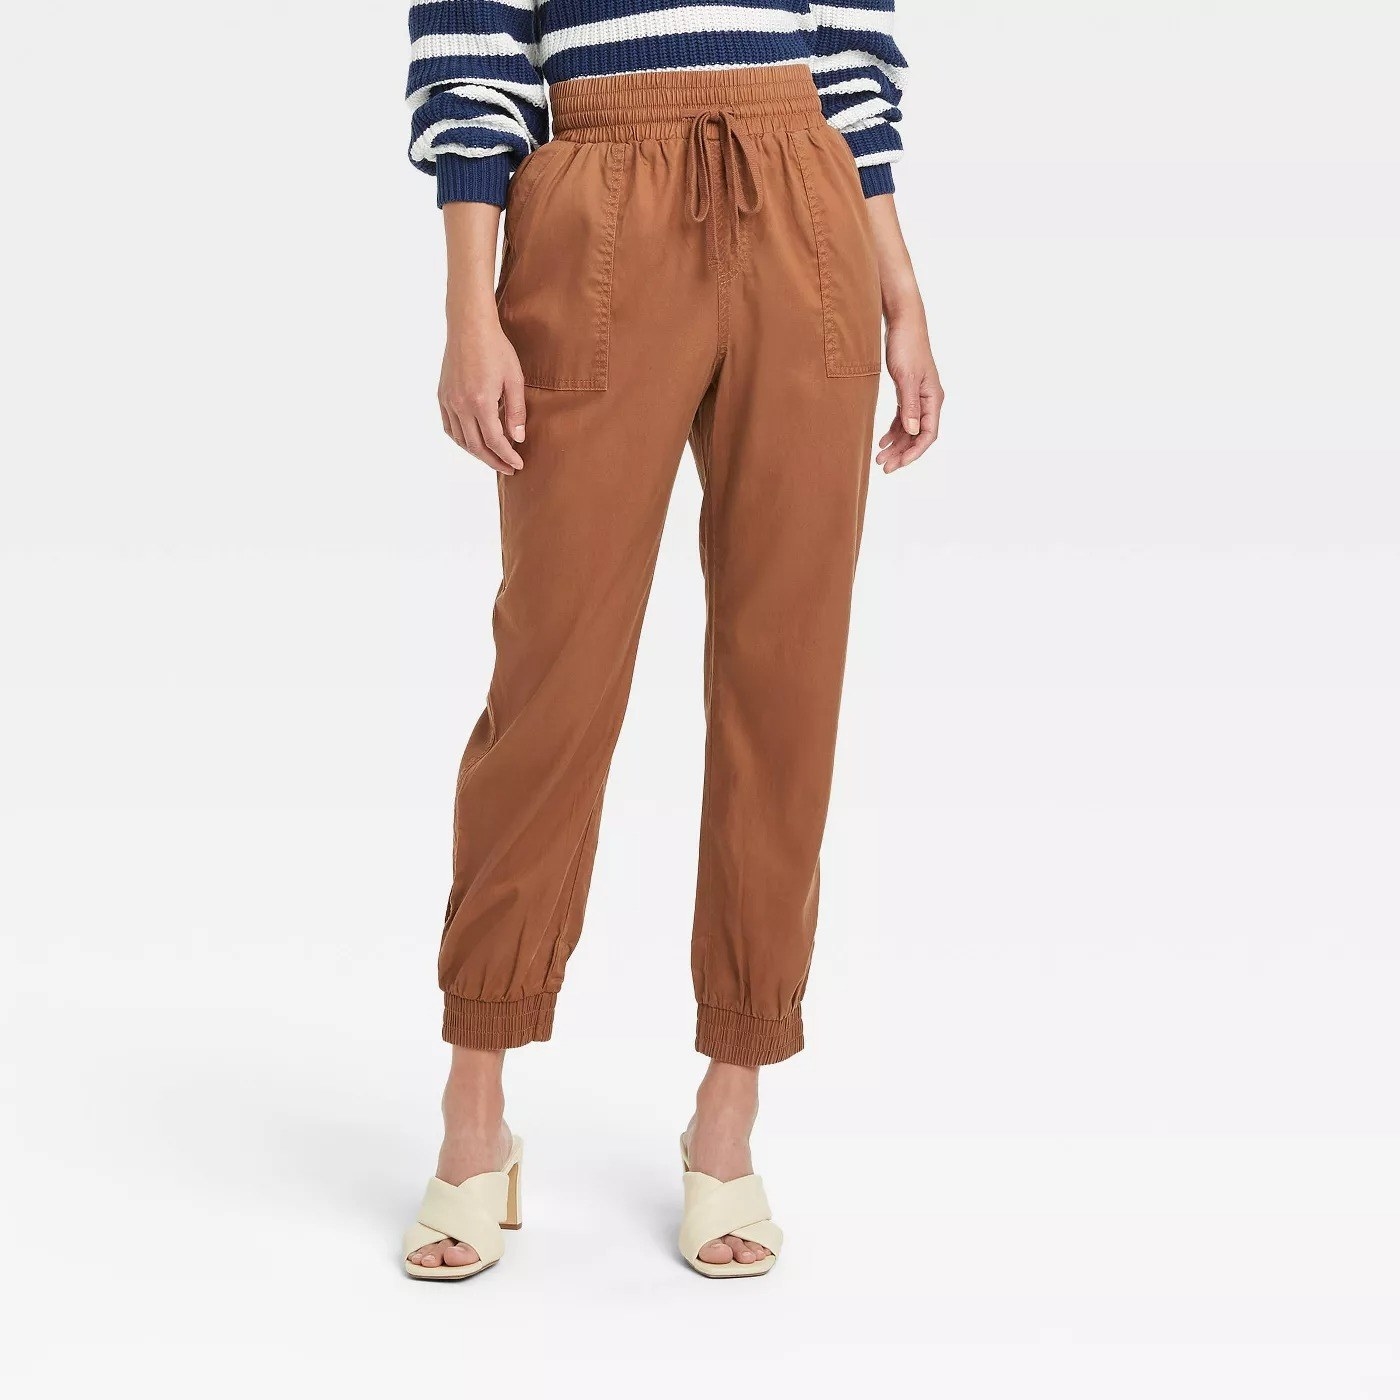 Model wearing brown pants with side pockets and tie string detail around waist